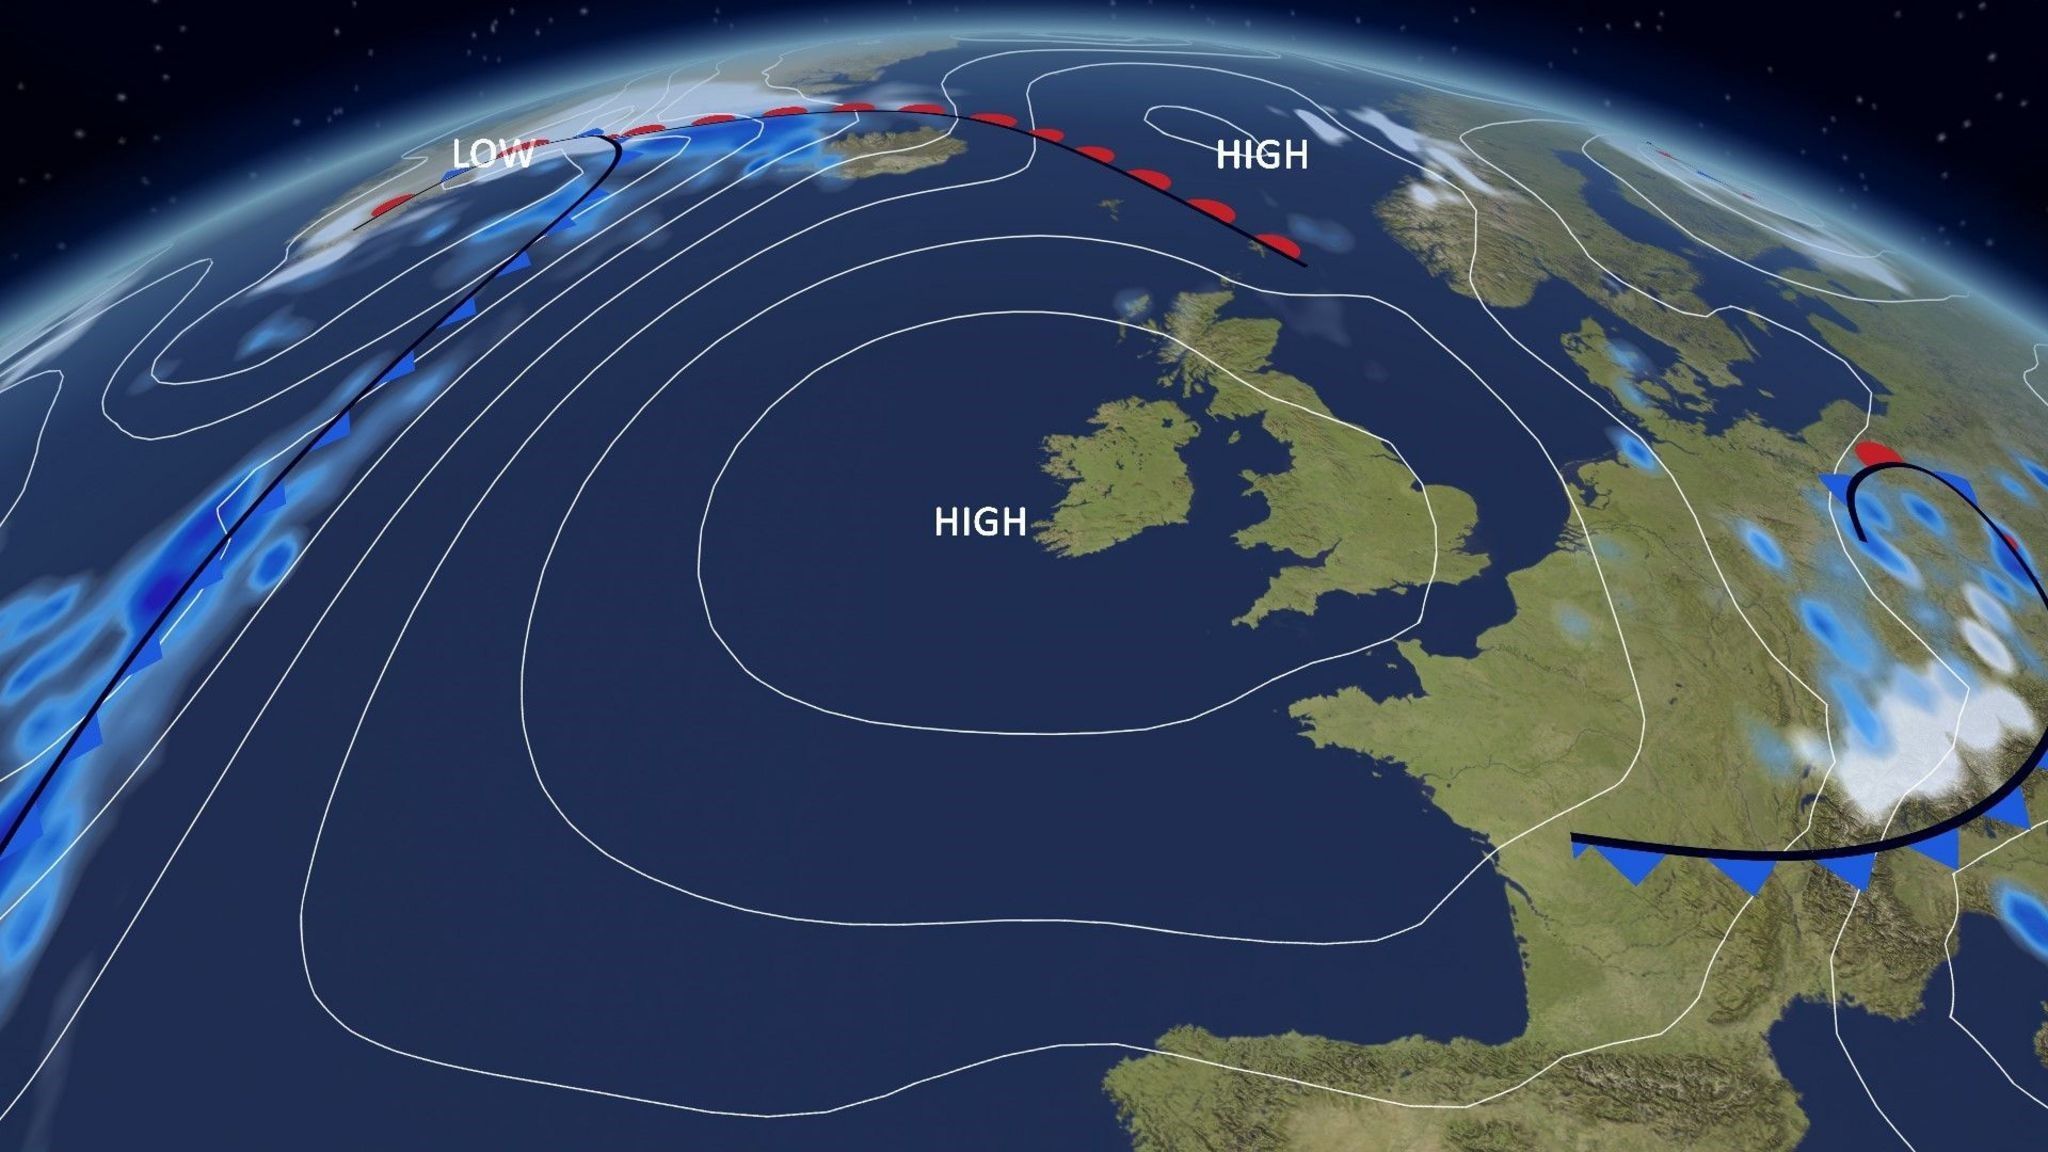 BBC Weather map showing an area of high pressure over the UK